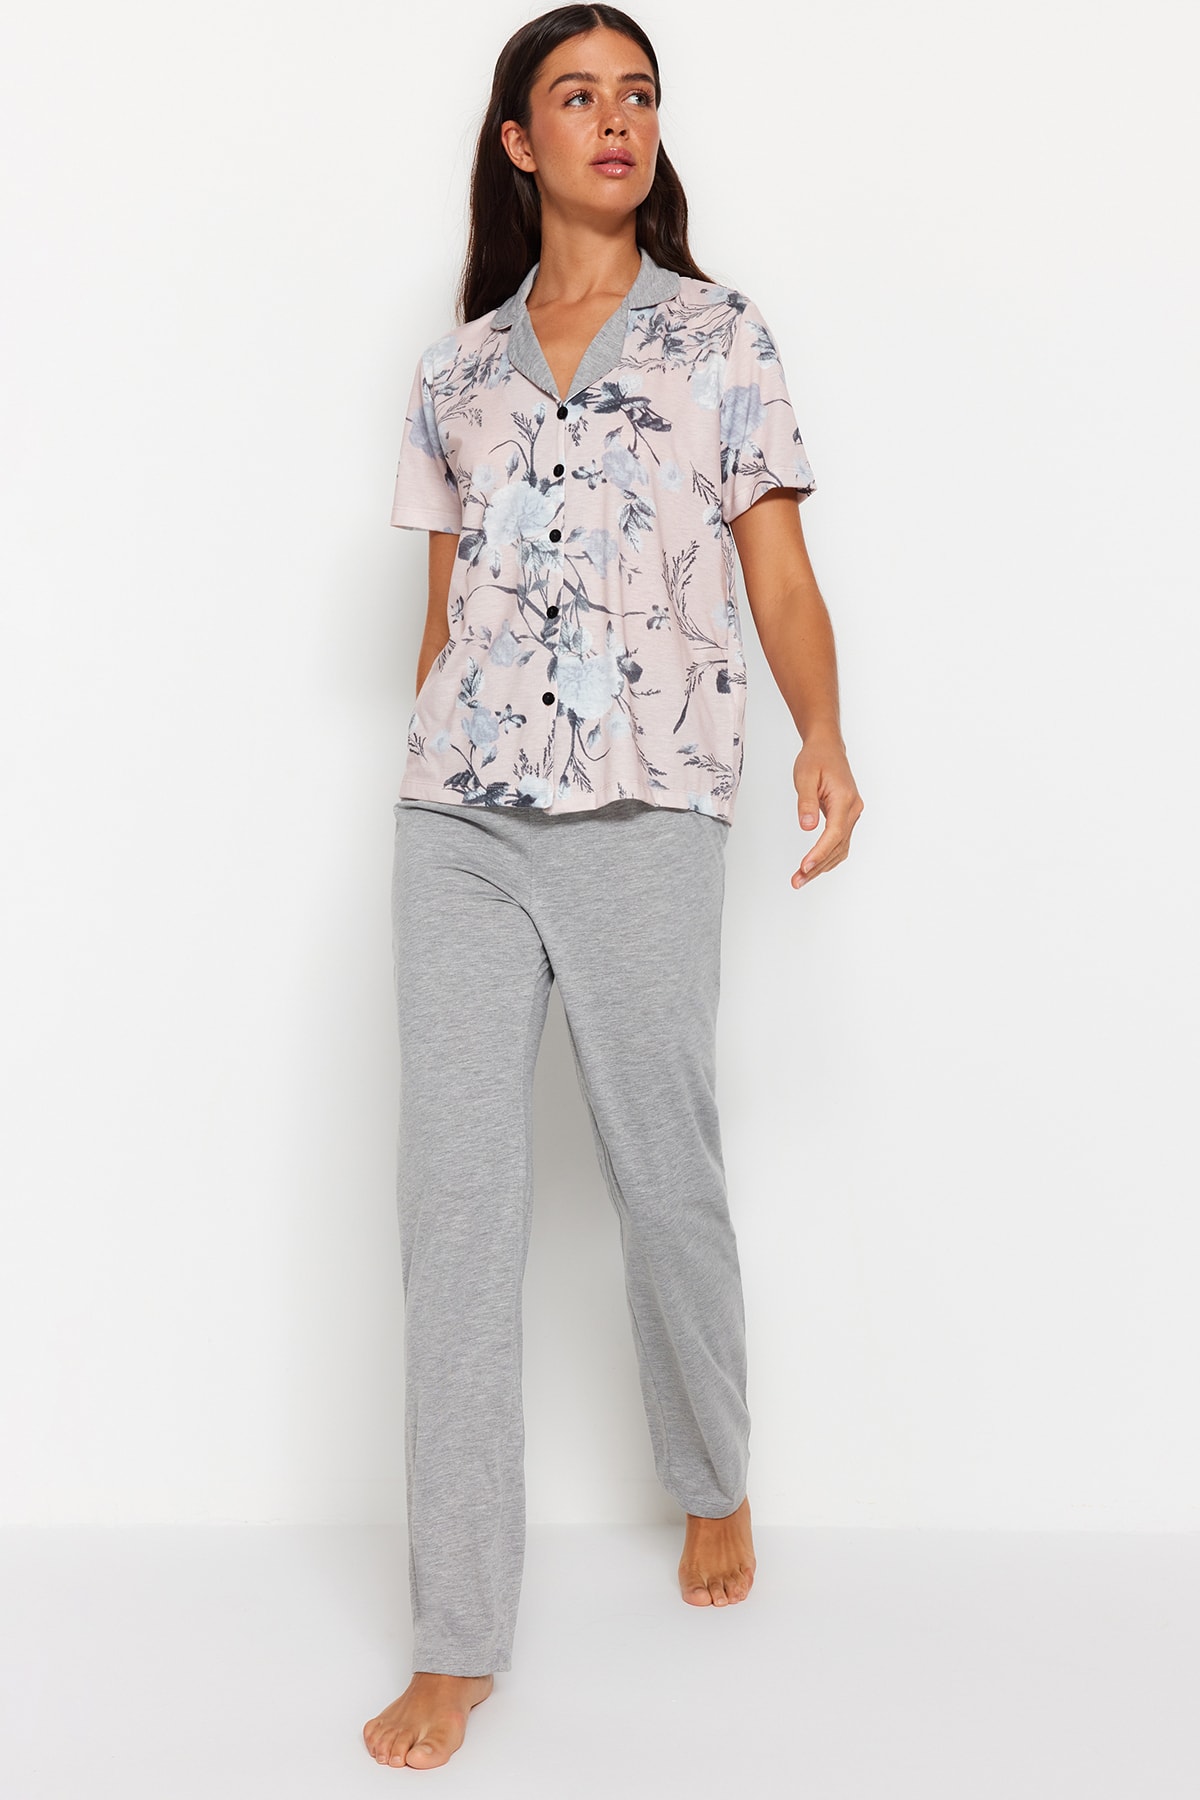 Trendyol Gray Floral Detailed Knitted Pajama Set